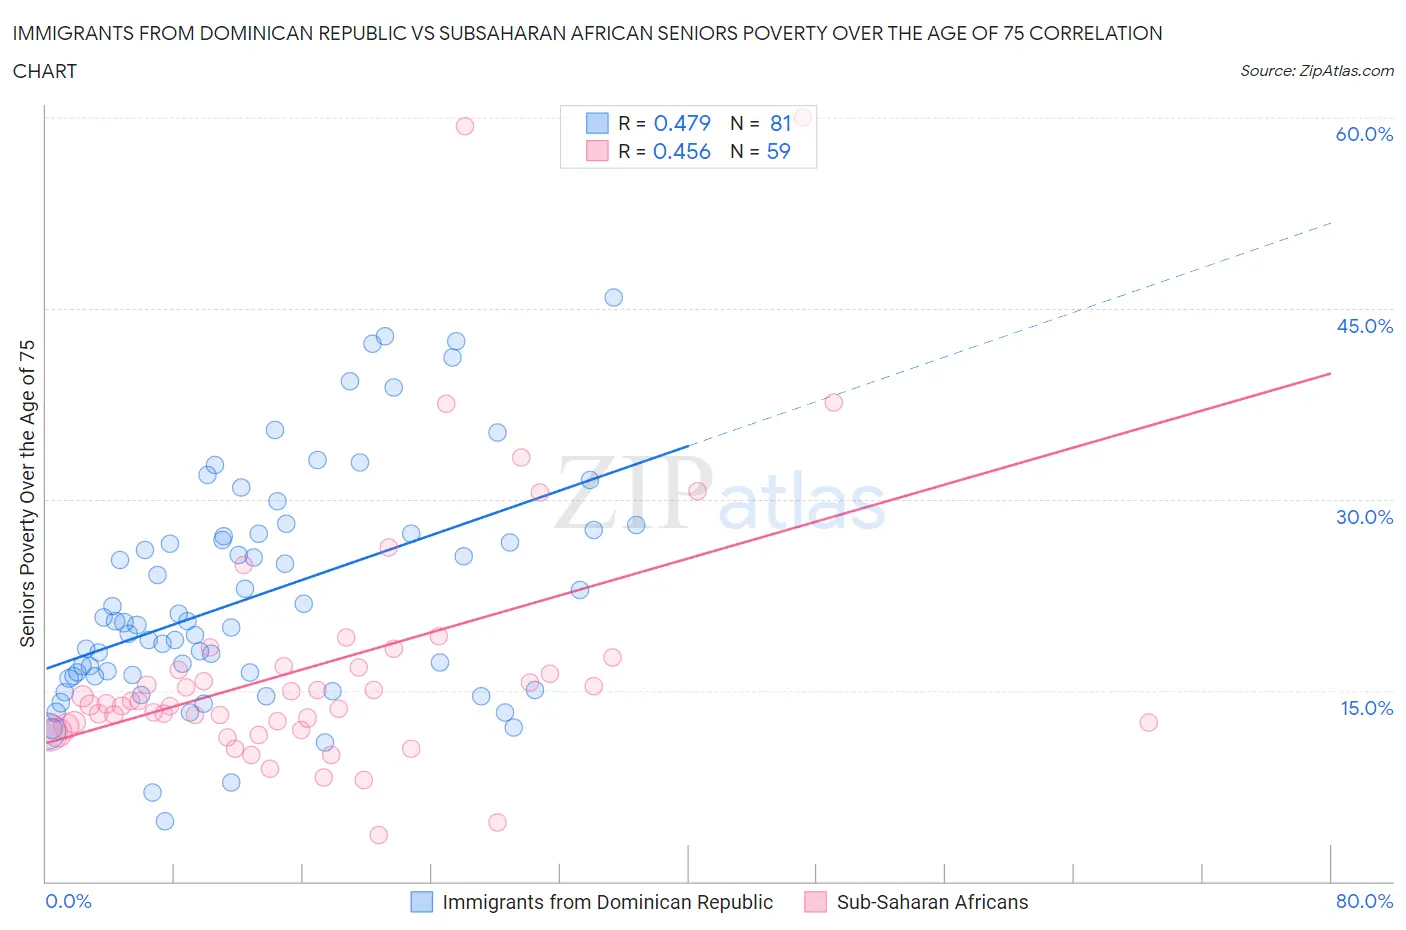 Immigrants from Dominican Republic vs Subsaharan African Seniors Poverty Over the Age of 75